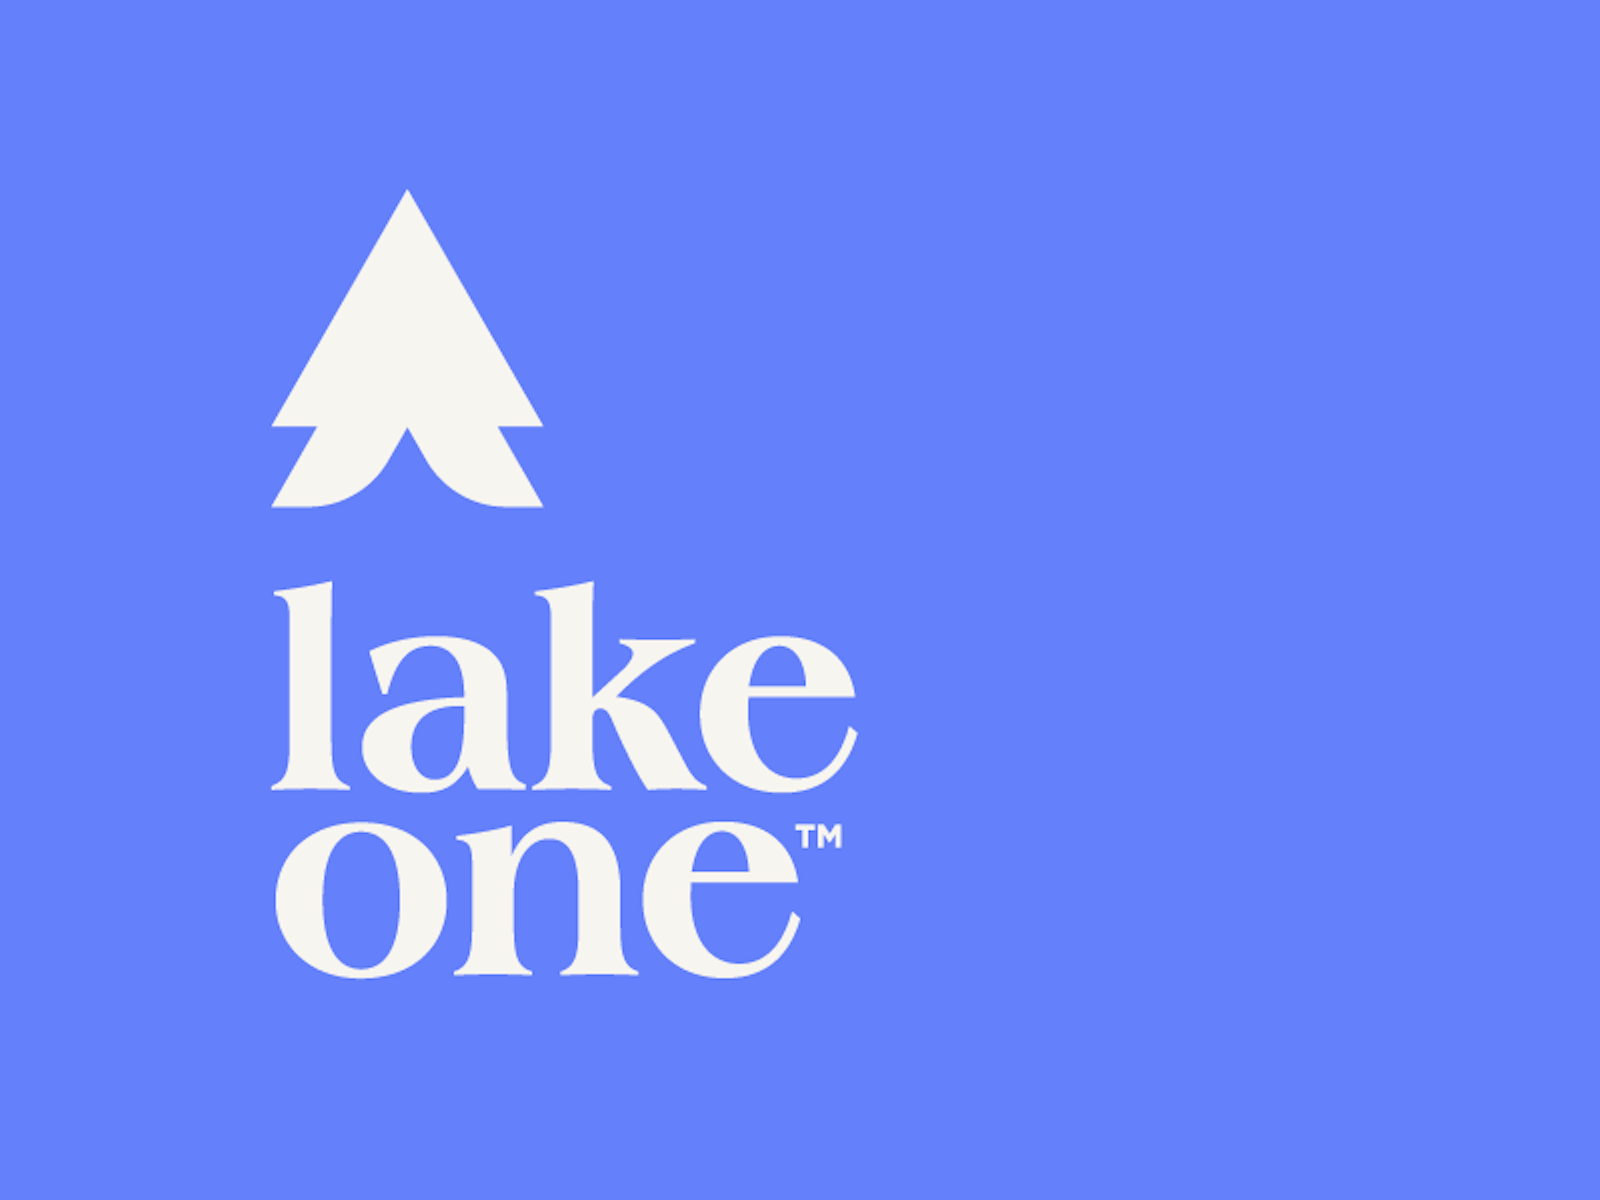 The Lake One brand logo design stacked over blue background.